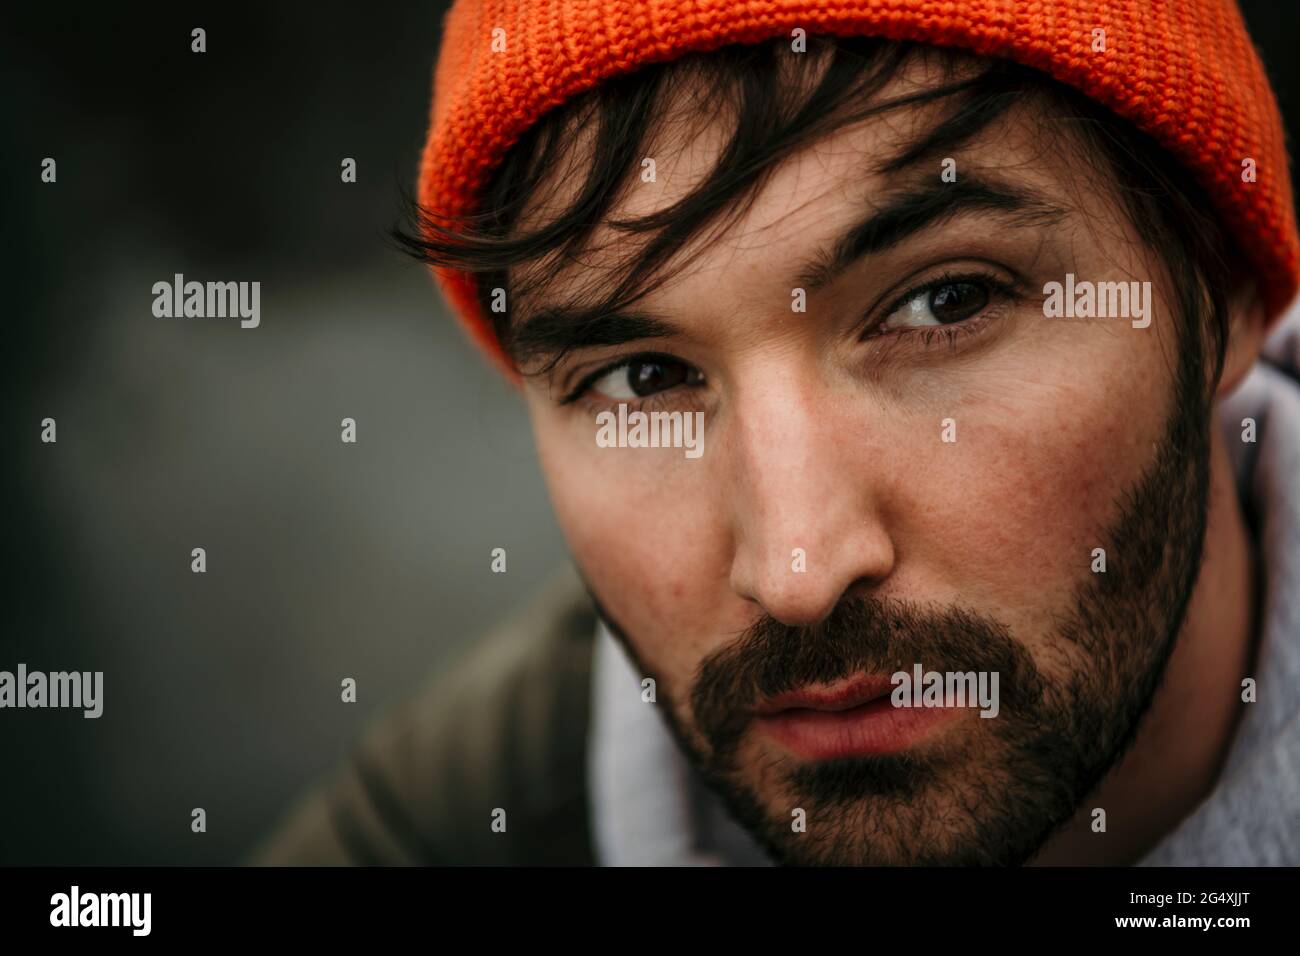 Handsome man wearing knit hat Stock Photo